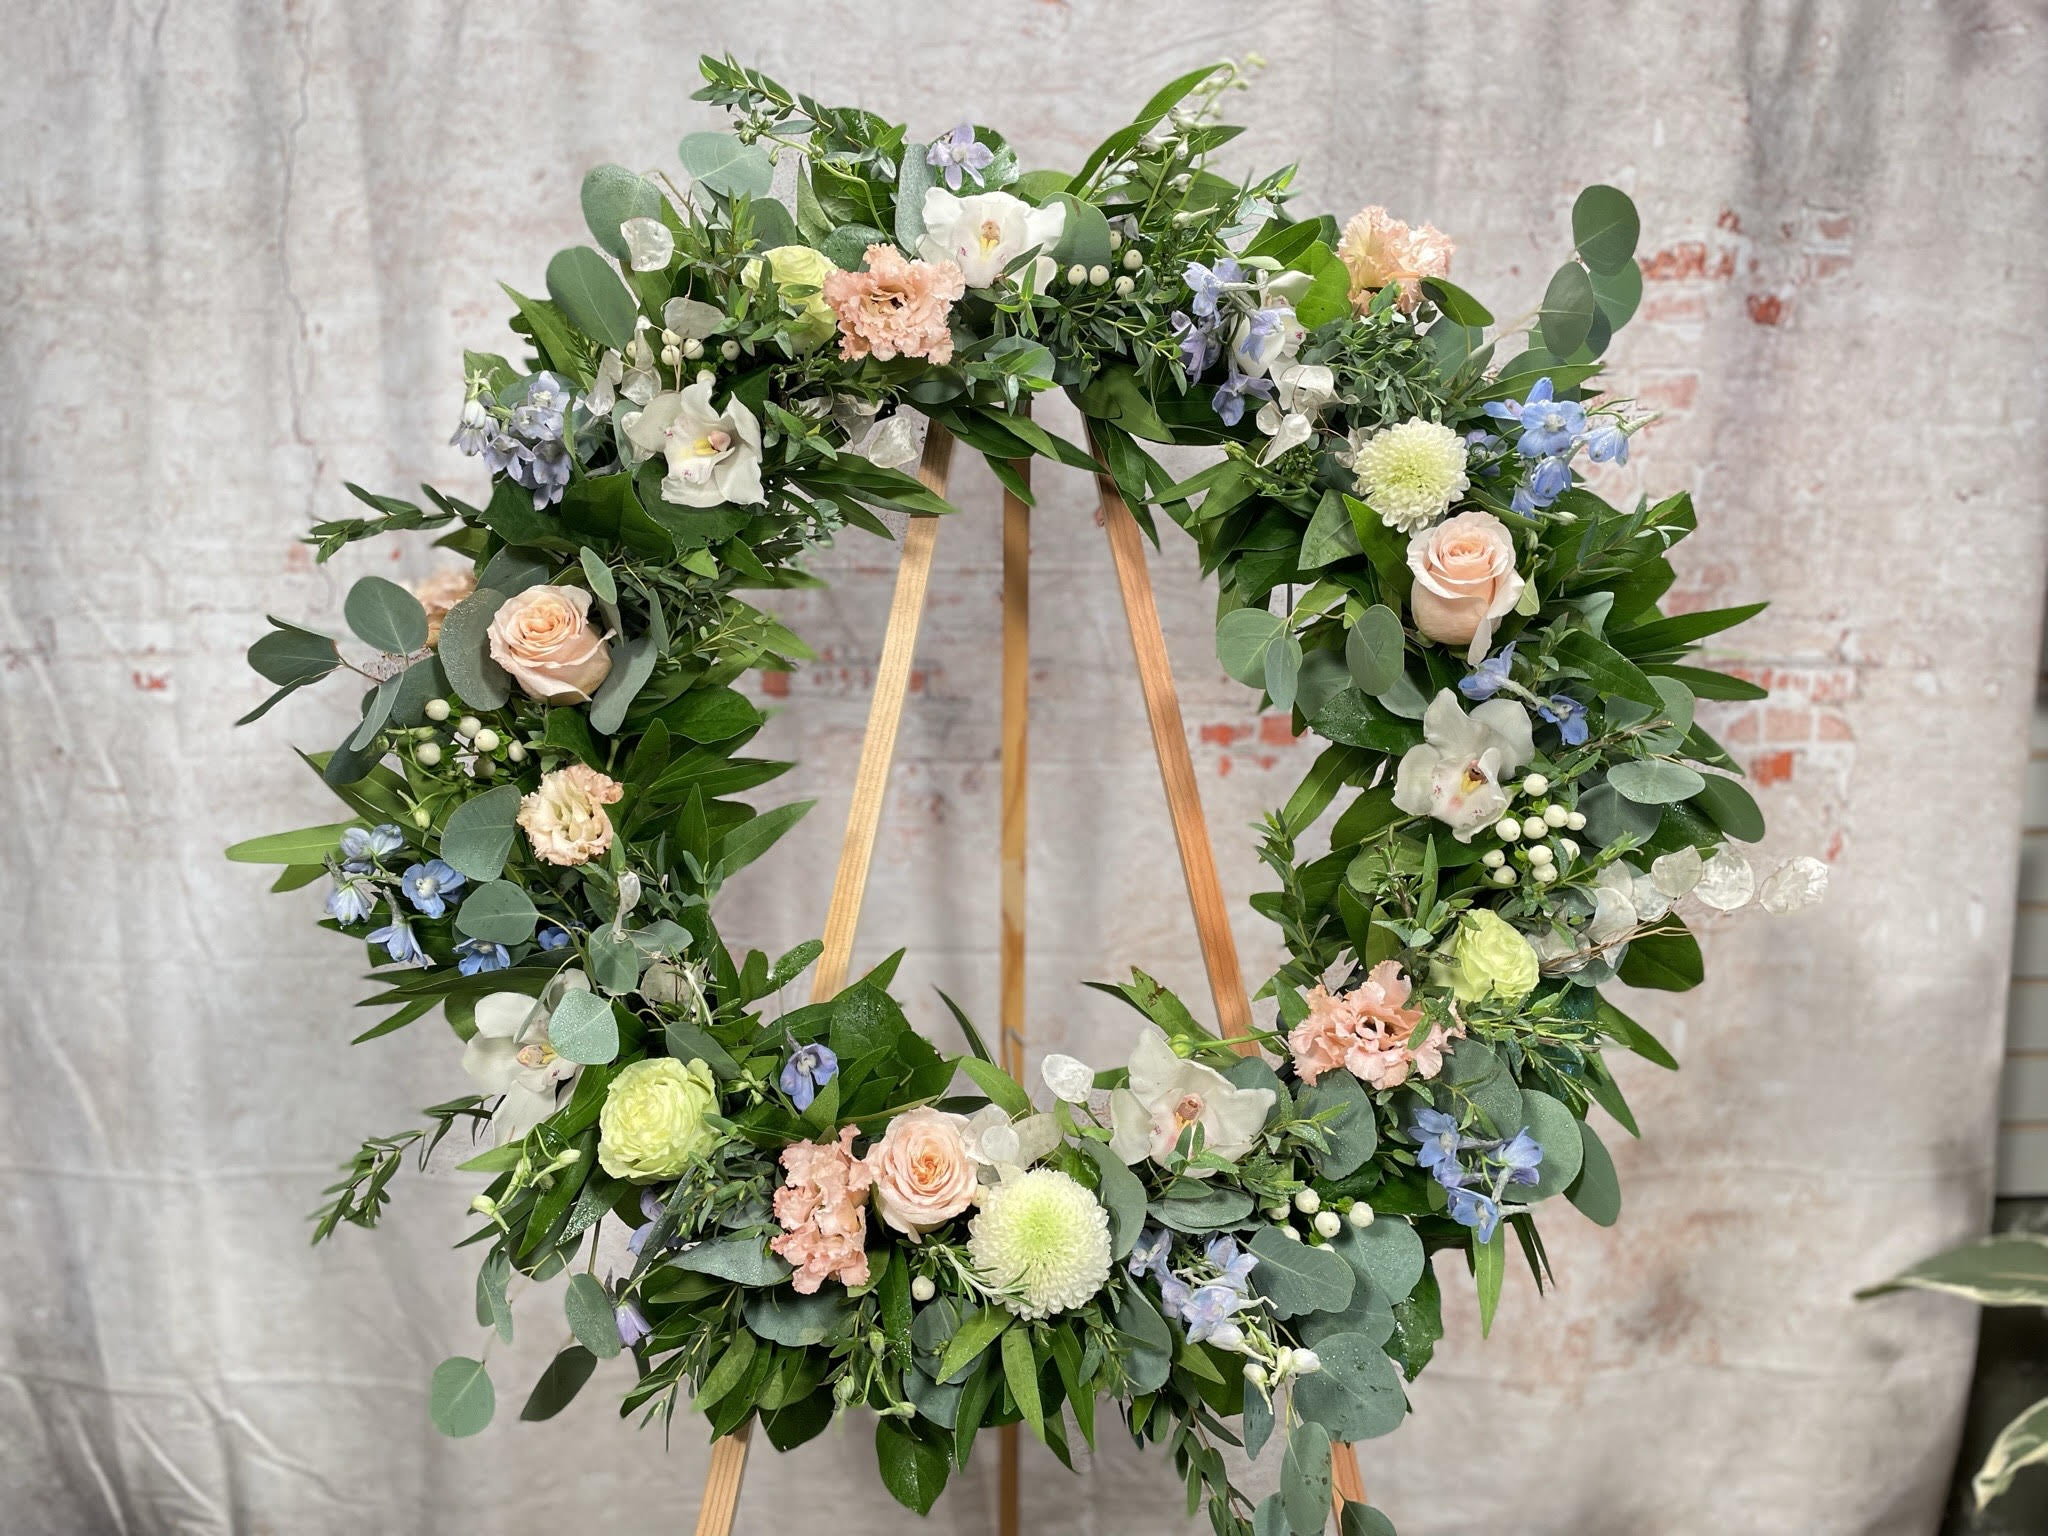 Cherished Wreath - Blue is for sorrow, and white is for hope. A beautiful wreath to honor the memory of a loved one featuring blue delphinium, white roses, white orchids, mixed greenery, a touch of peach. Airy and gardeny. 